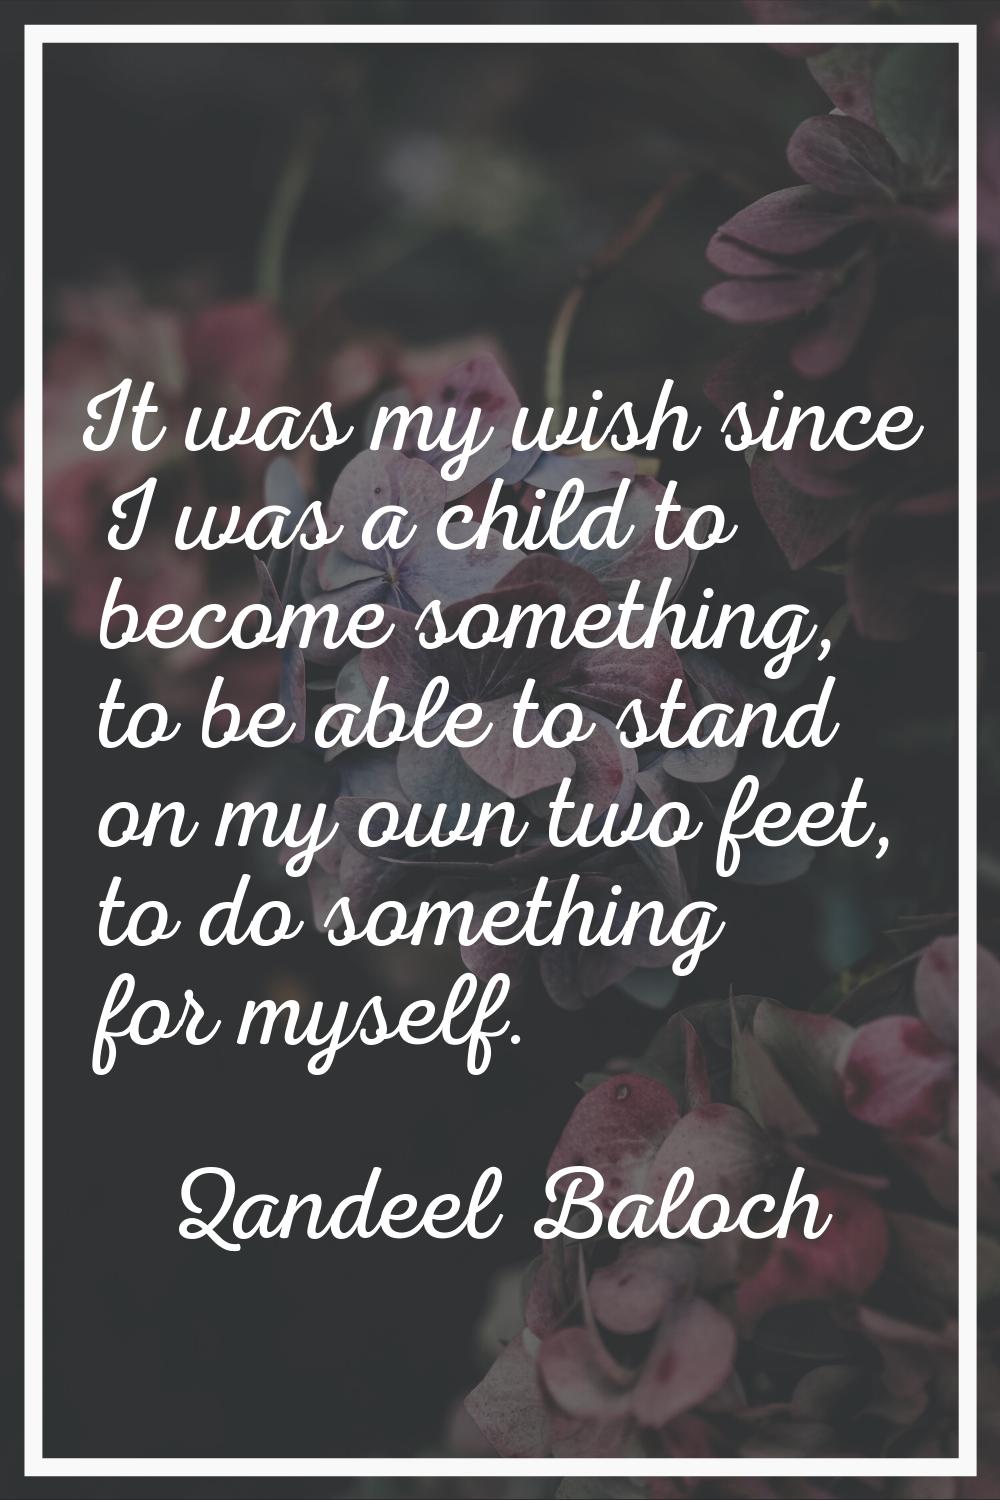 It was my wish since I was a child to become something, to be able to stand on my own two feet, to 